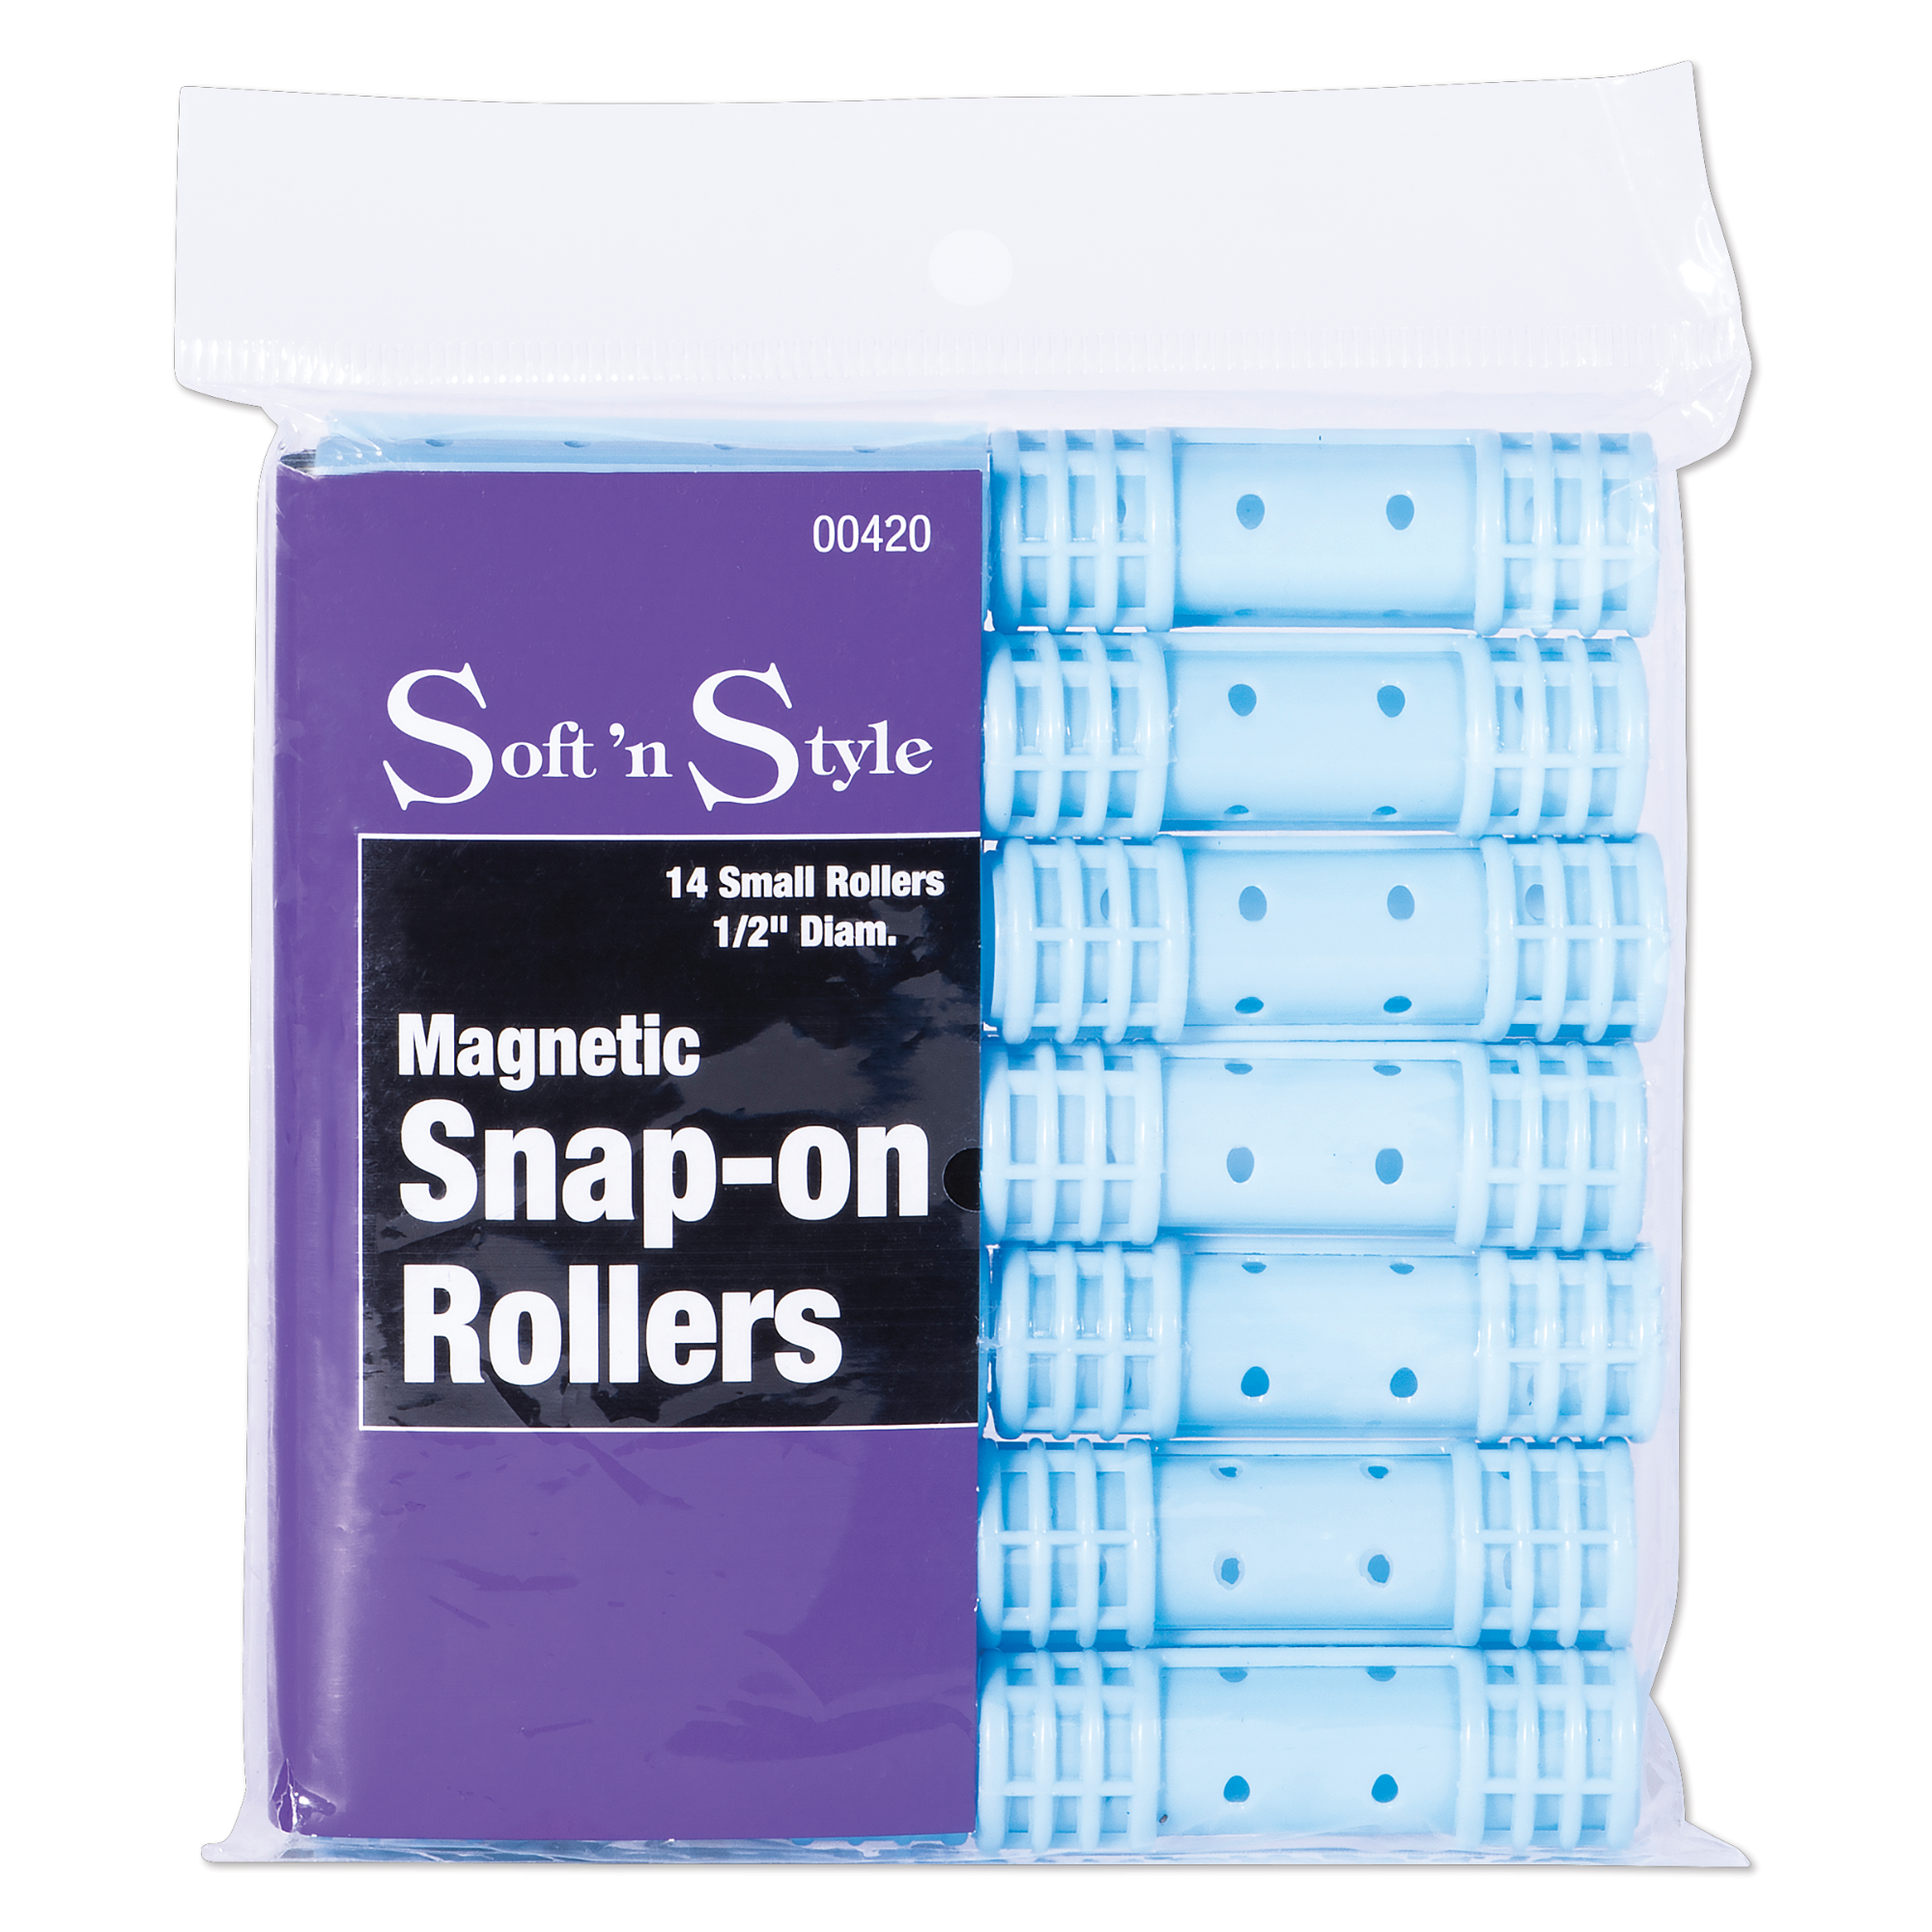 Magnetic Snap-on Rollers, Small - 1/2"